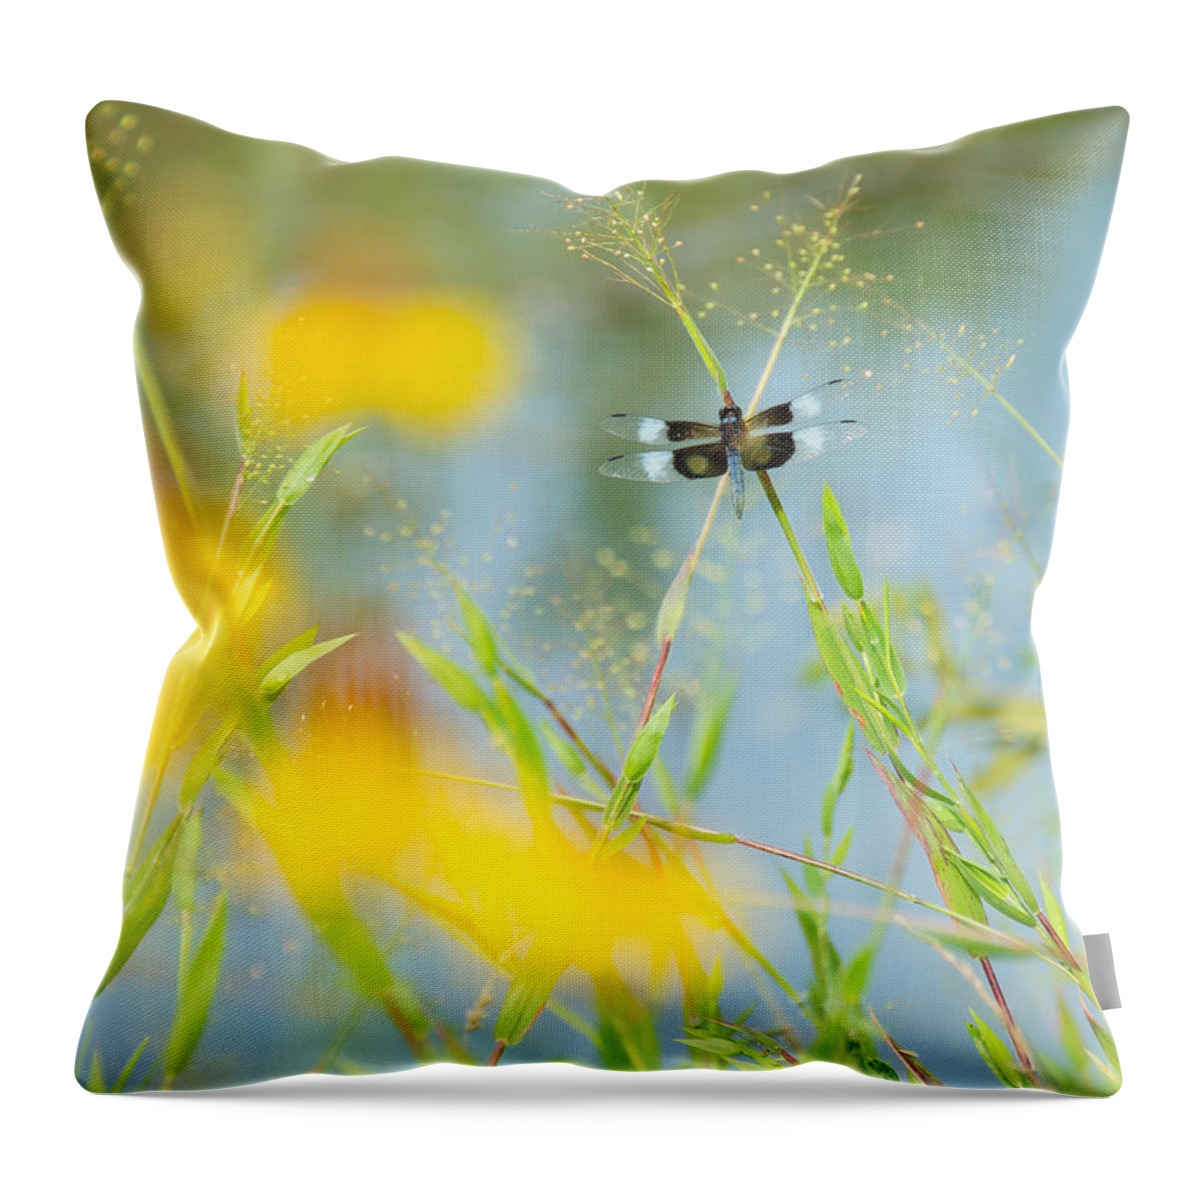 Dragonfly Throw Pillow featuring the photograph Dragonfly Beauty by Stacy Abbott